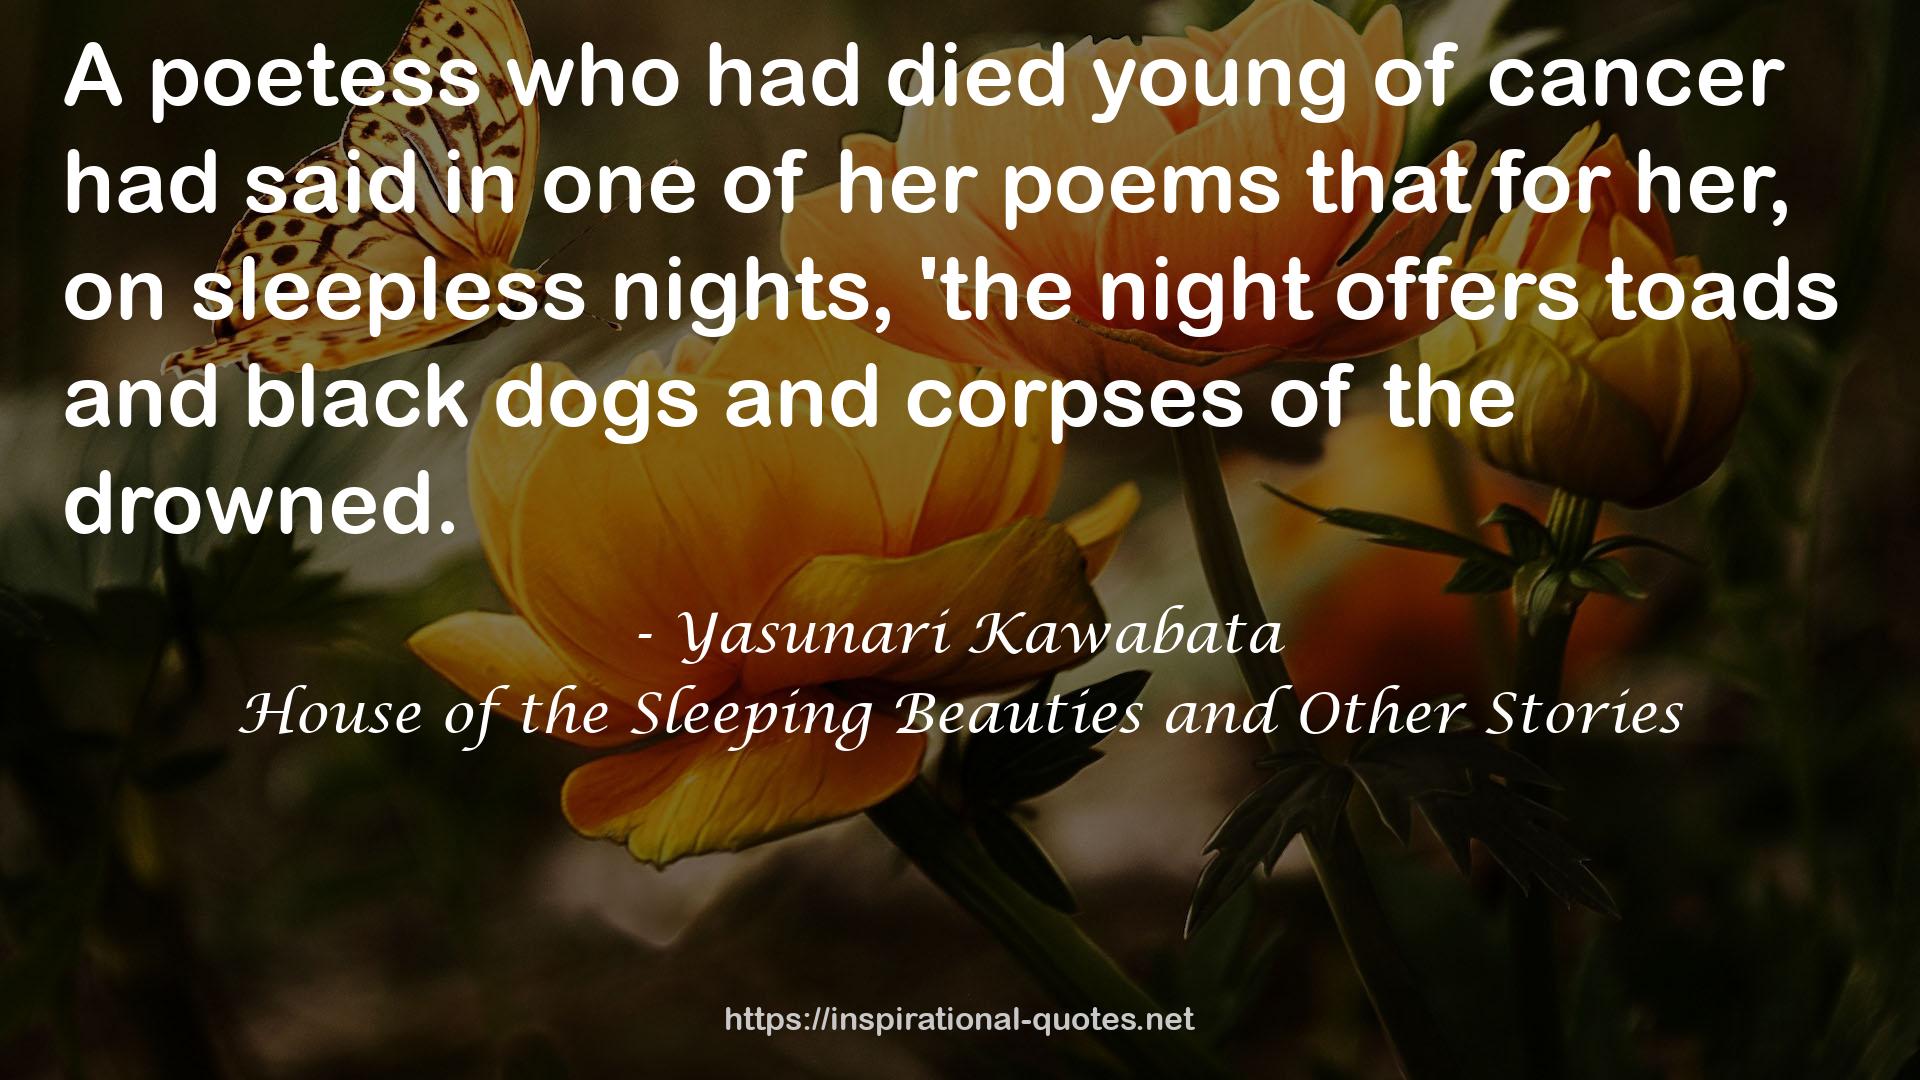 House of the Sleeping Beauties and Other Stories QUOTES